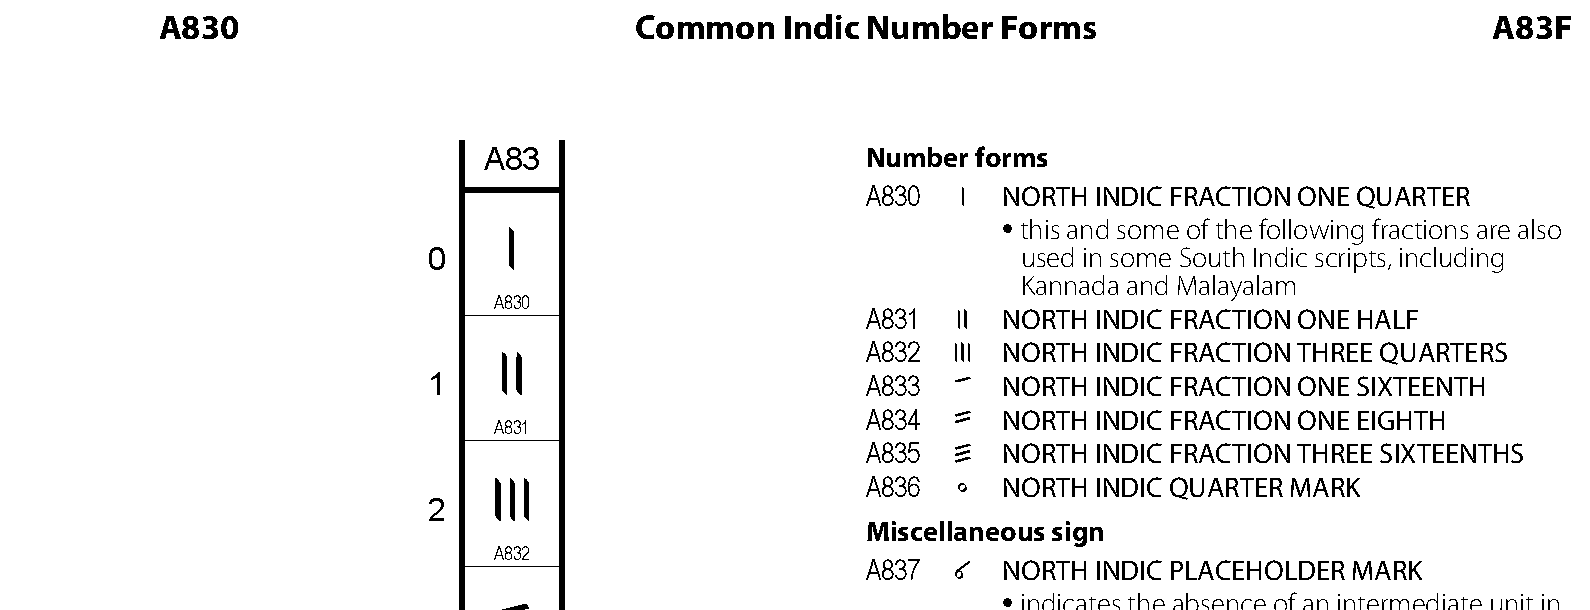 Unicode - Common Indic Number Forms